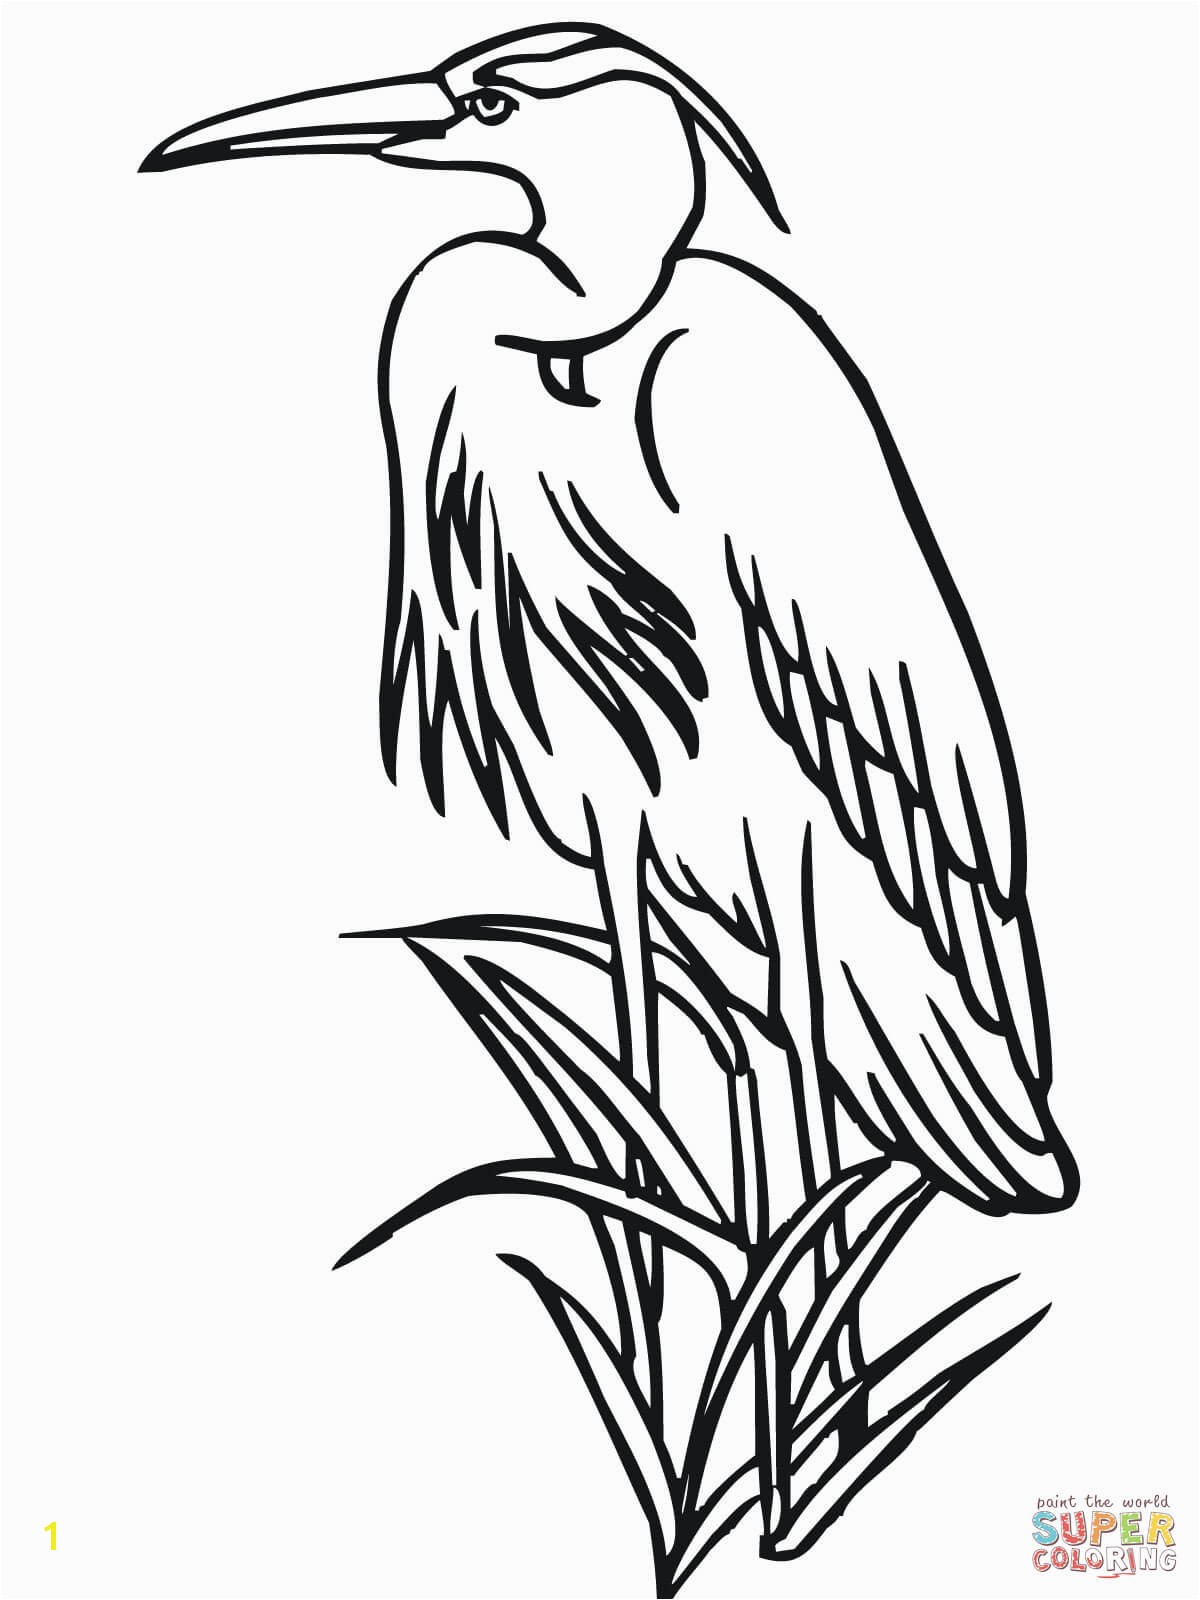 Blue Heron Coloring Page Heron Coloring Pages